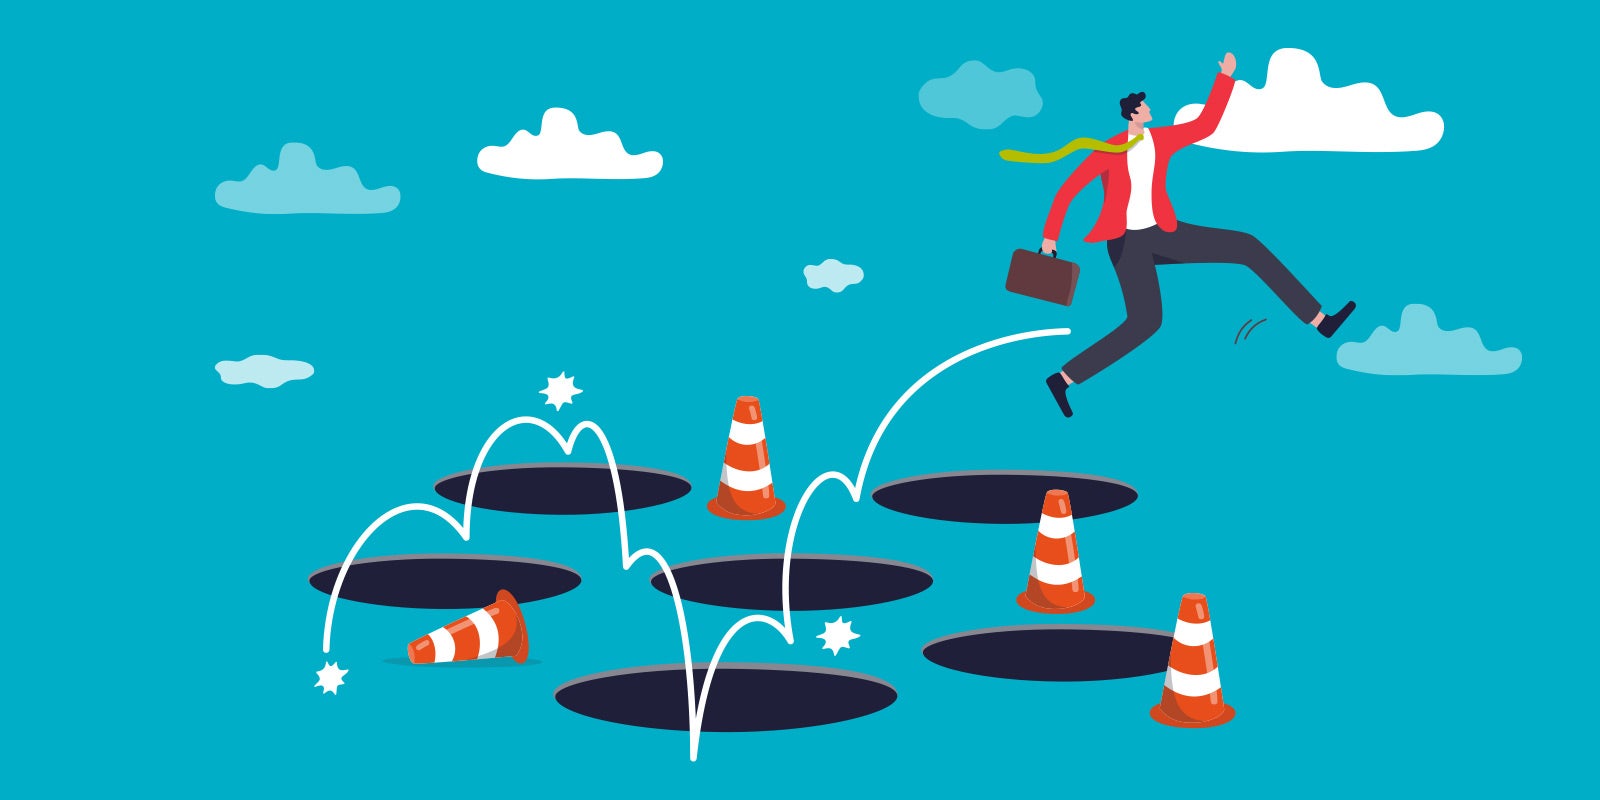 illustration of a man business professional jumping and running, avoiding potholes on the ground that are marked with orange traffic cones, to show this blog post is about how to avoid effective delegation mistakes